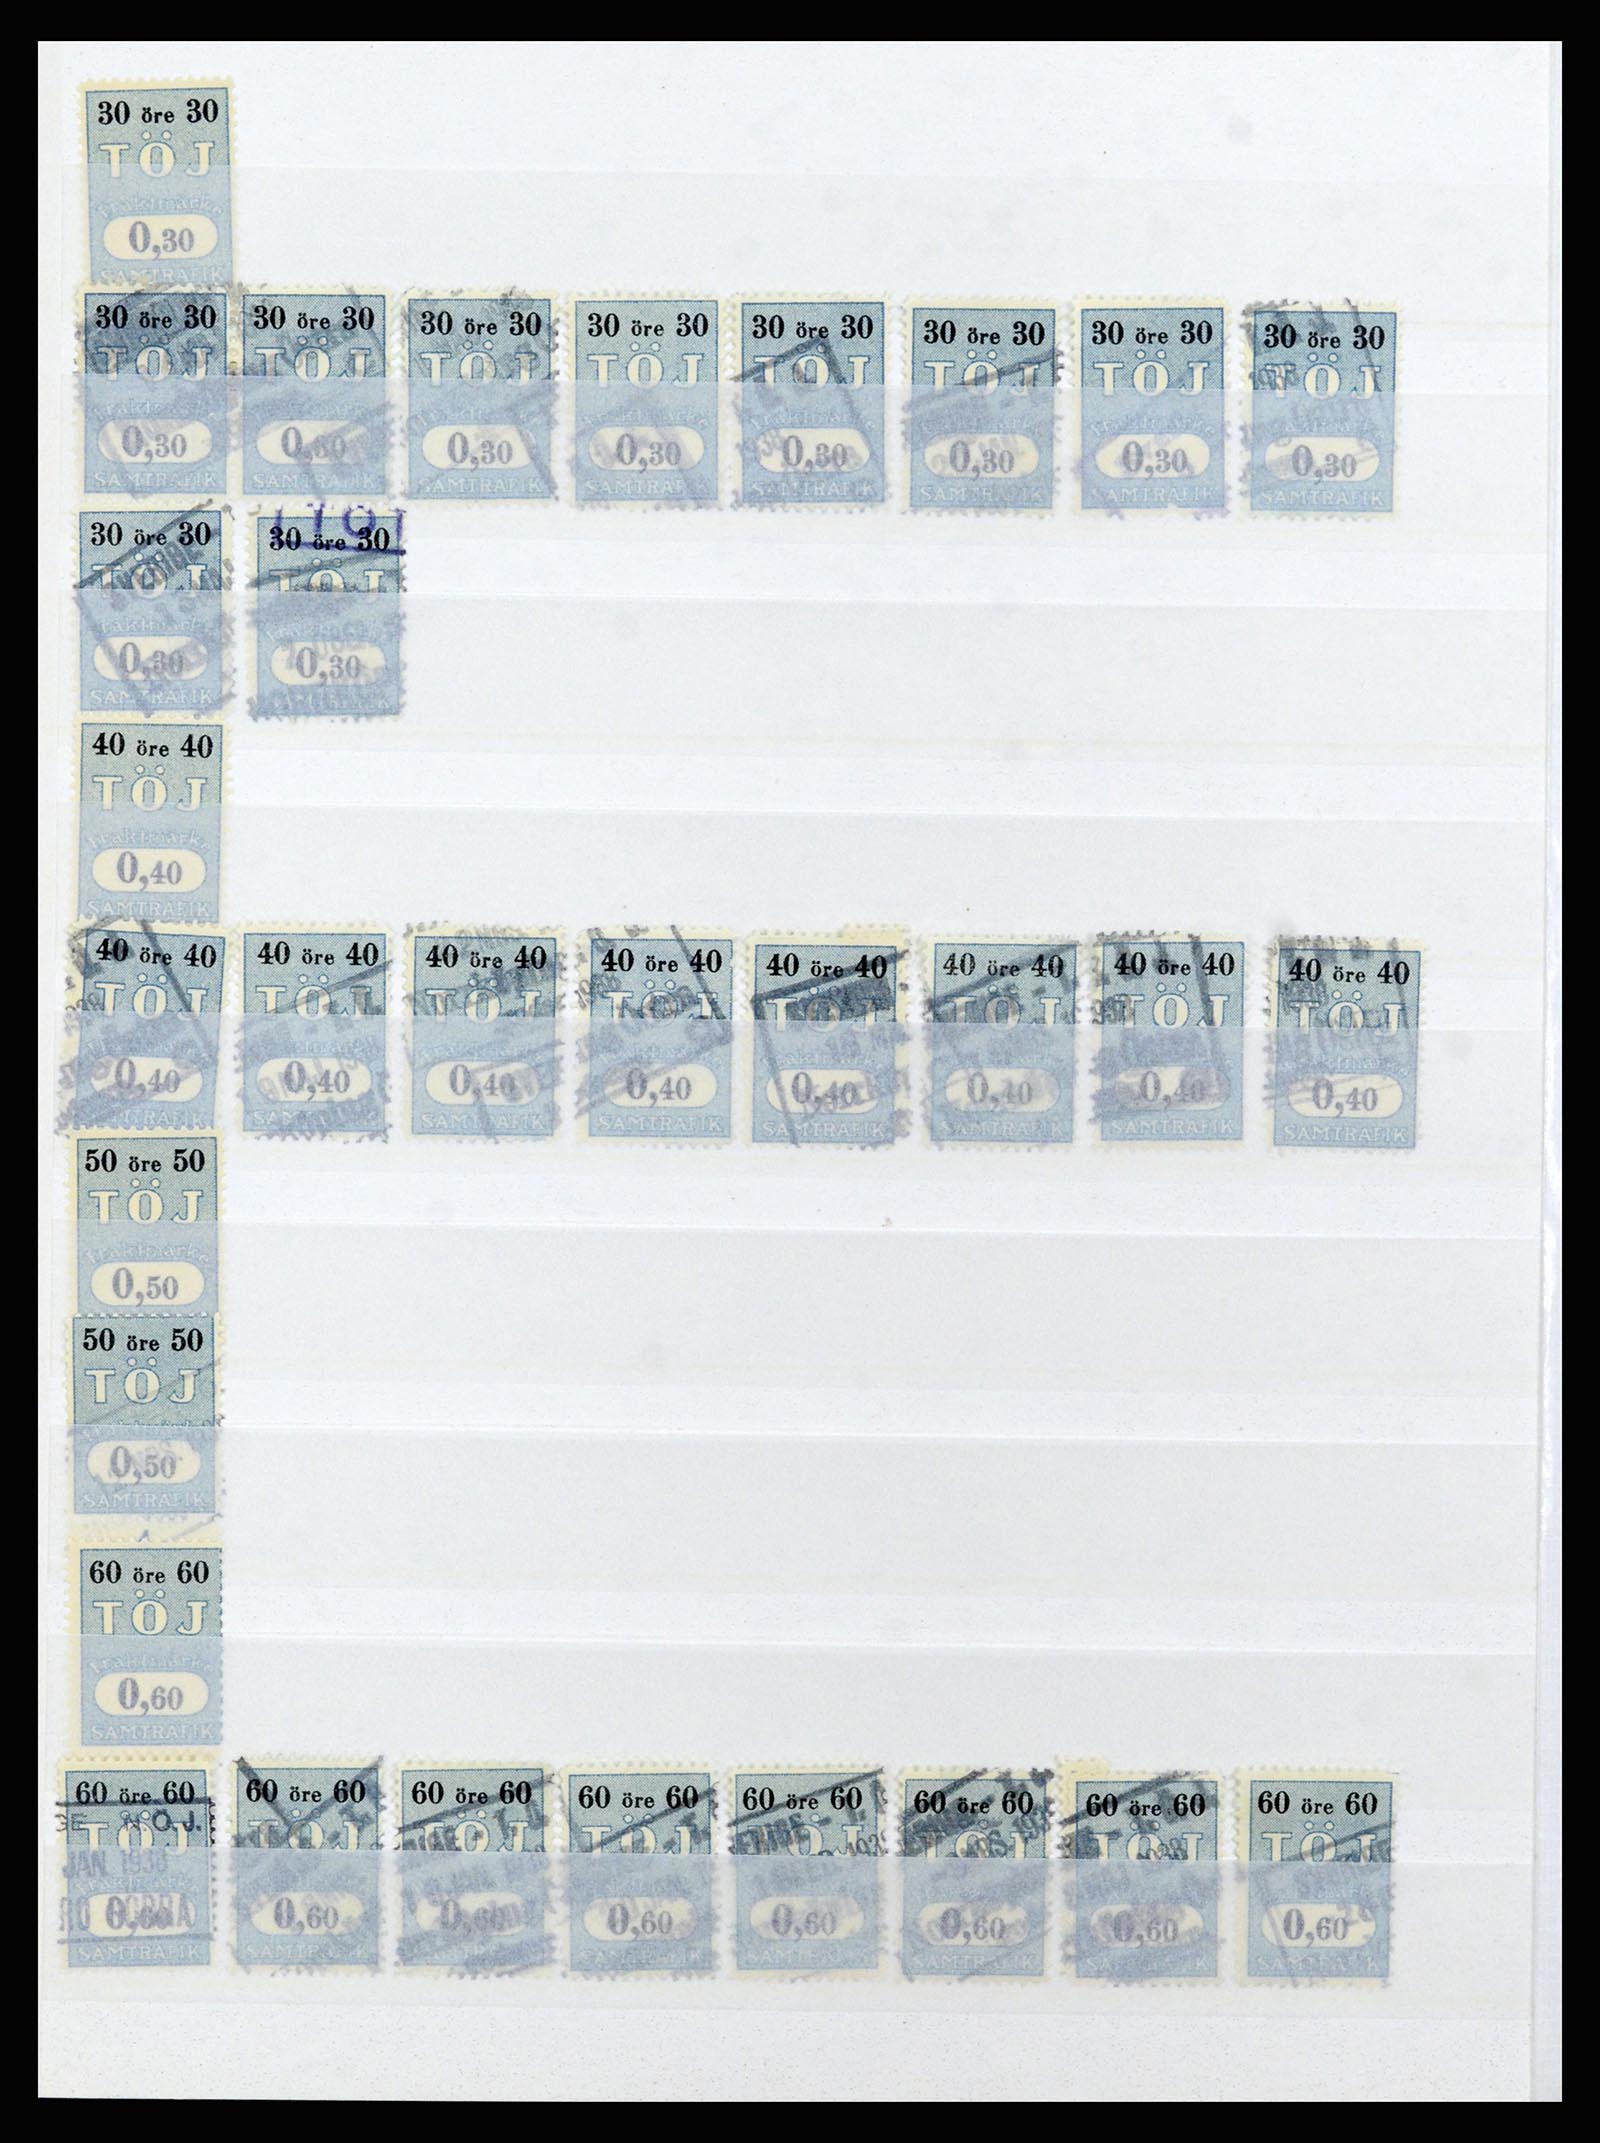 36981 020 - Stamp collection 36981 Scandinavia railroadstamps.